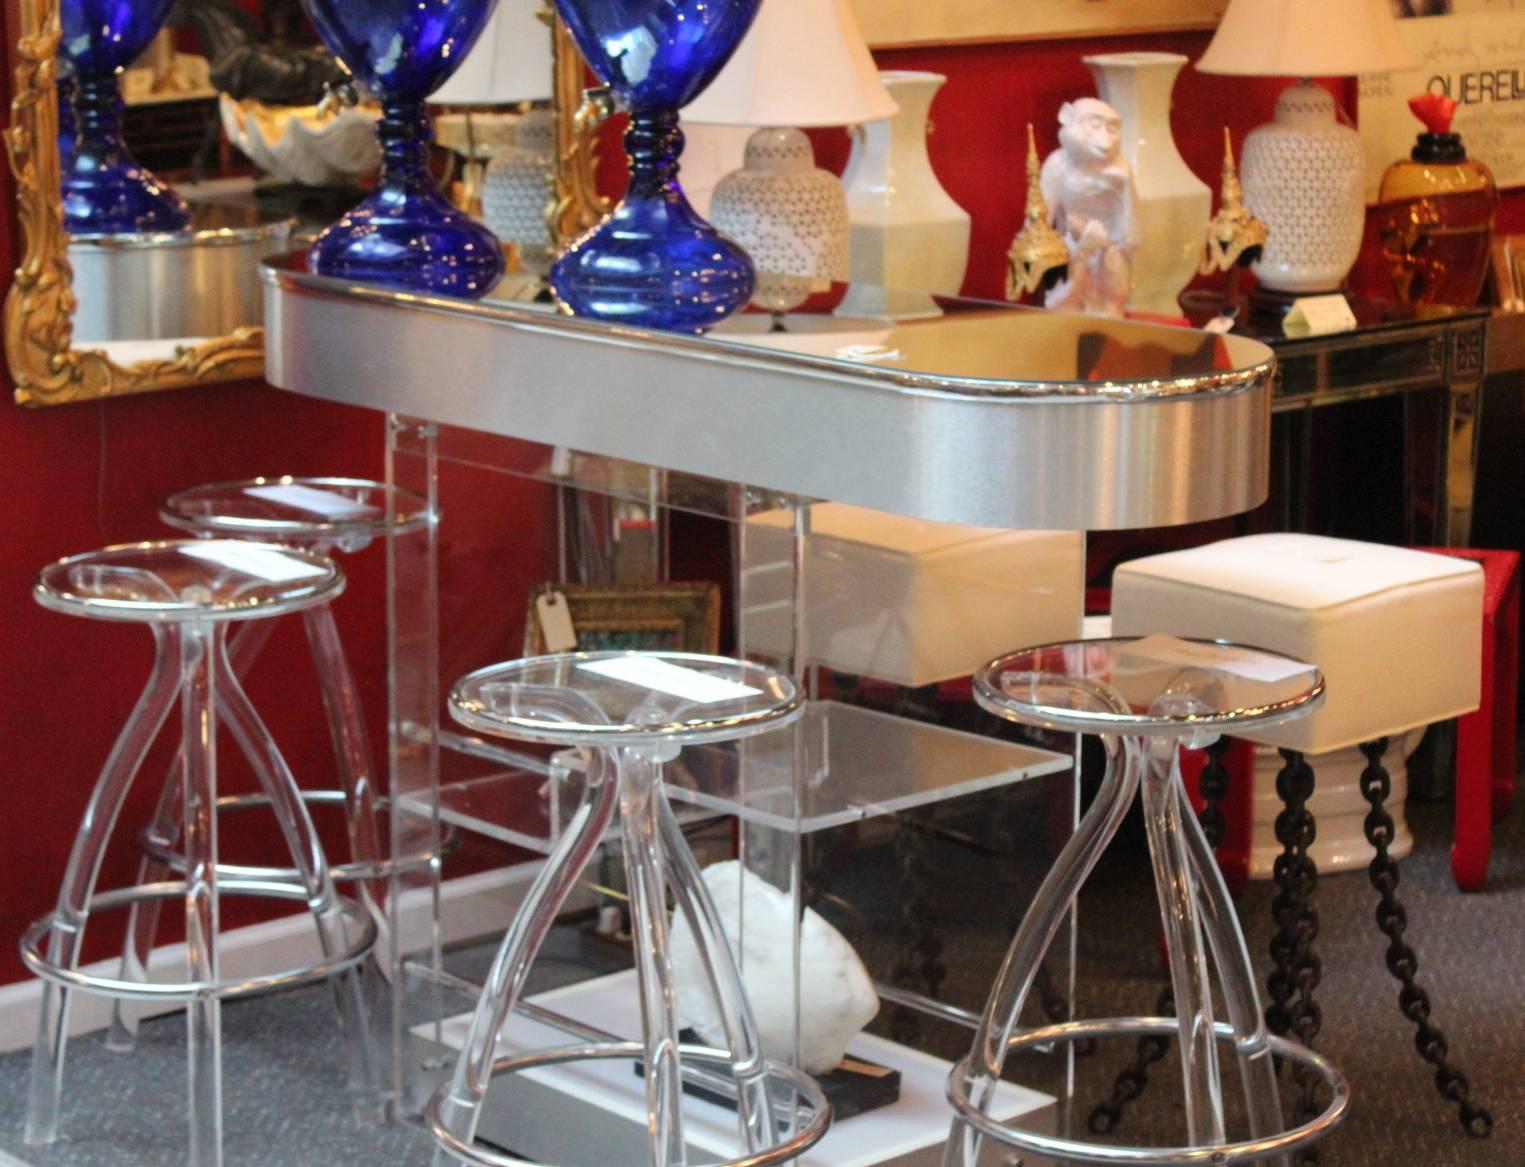 Lucite bar with mirrored top and chrome mounts by Hill Mfg.
Hill is known for best of the best Lucite furniture and fixtures and their designs have become iconic and collectible. The bar is in excellent original condition with minimal wear.